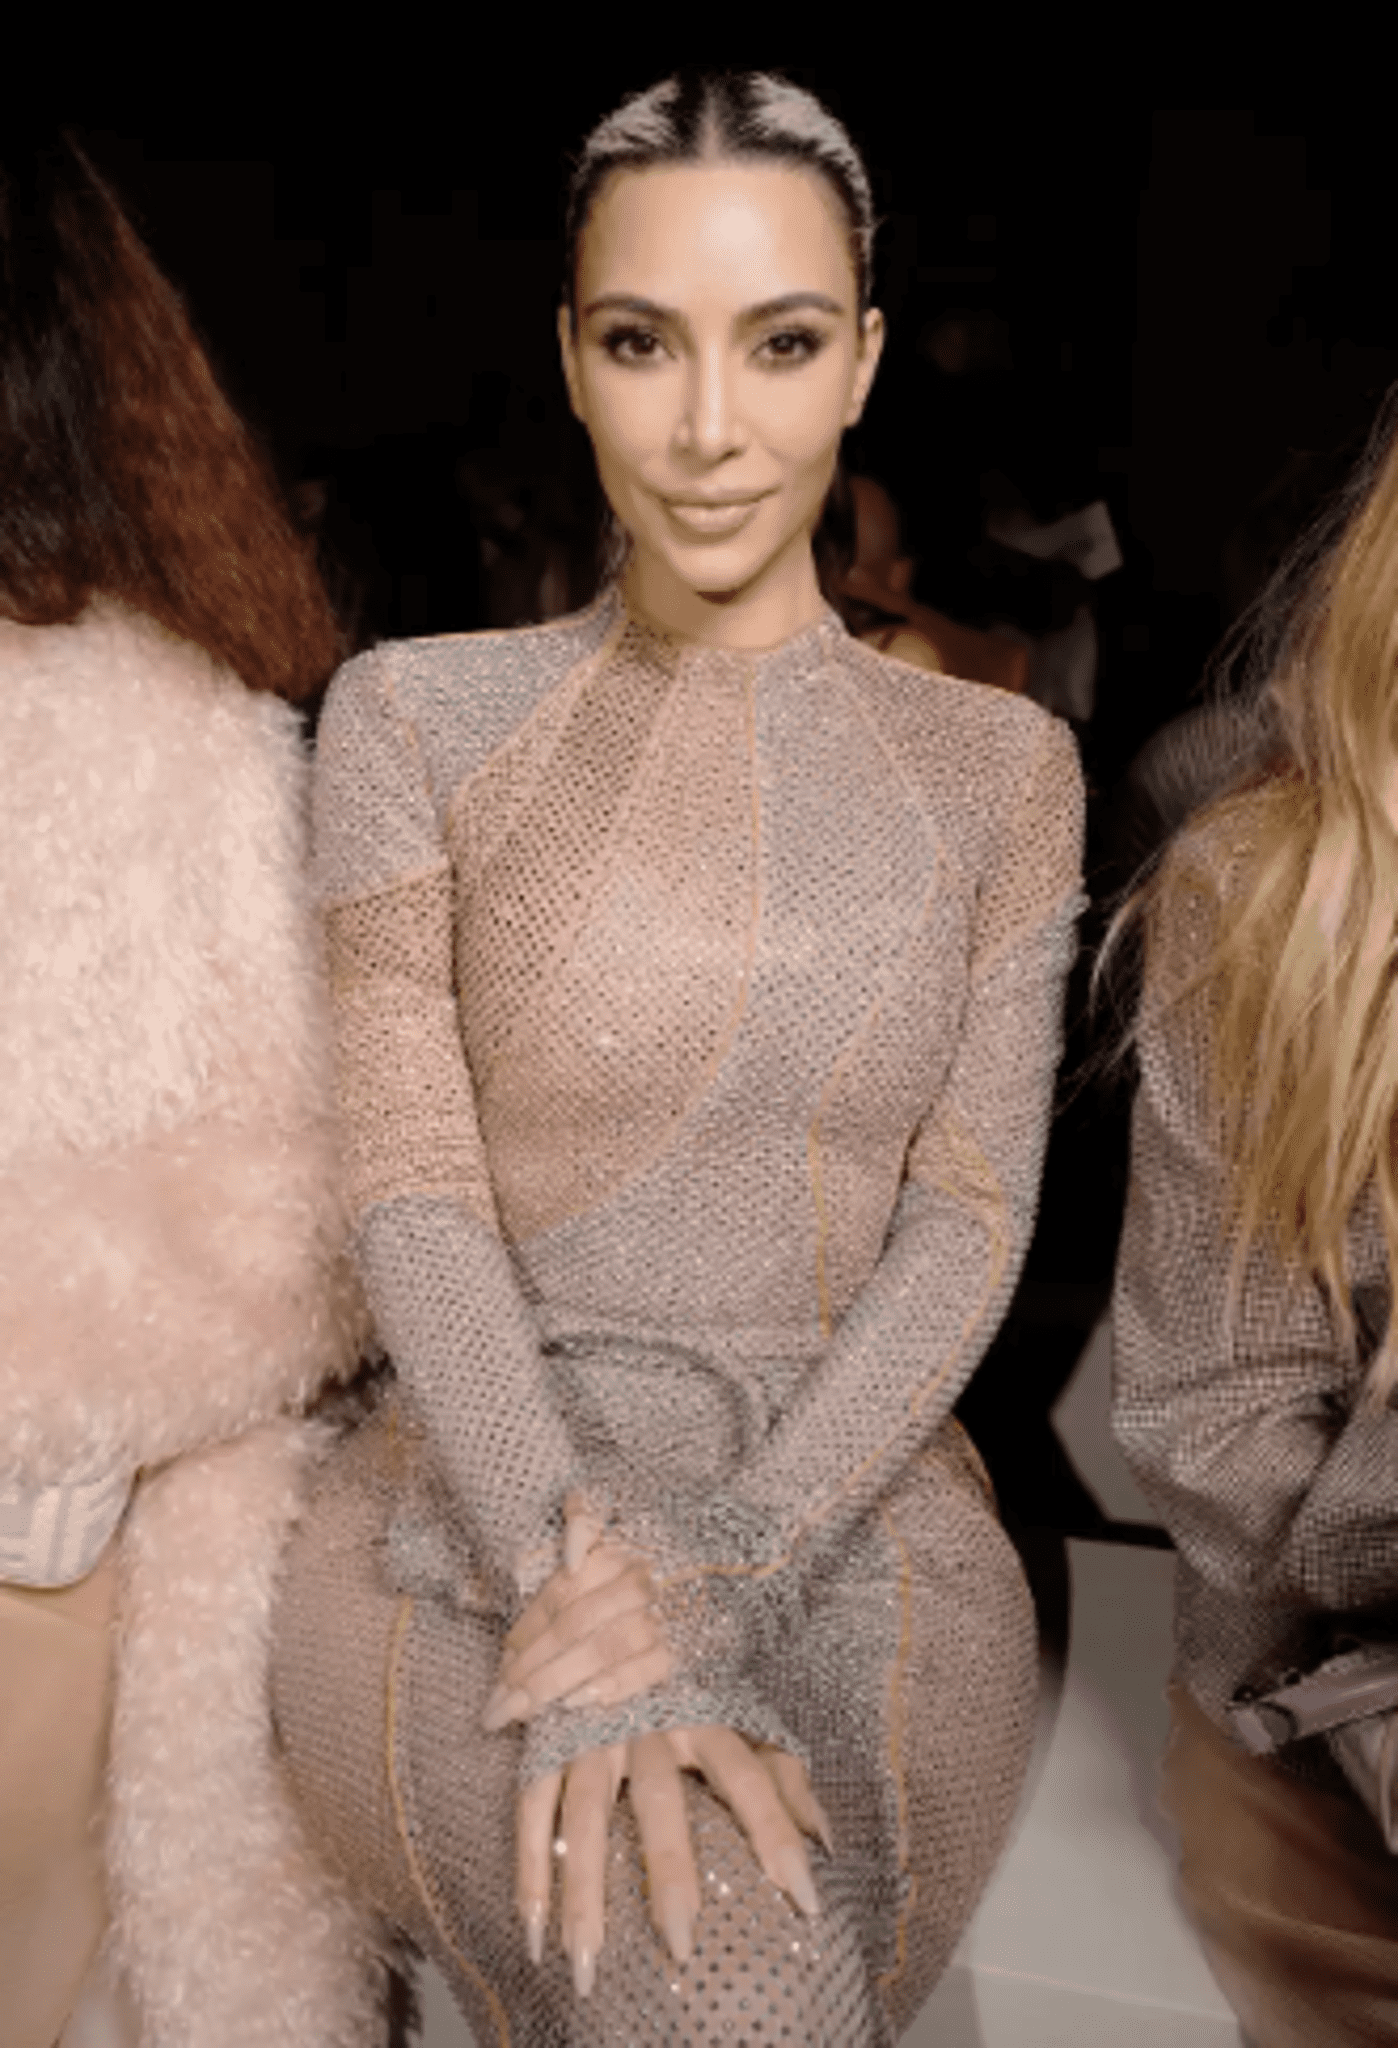 Kim Kardashian New Concrete Home Accessory Collection Is The Epitome Of Sleek Simplicity